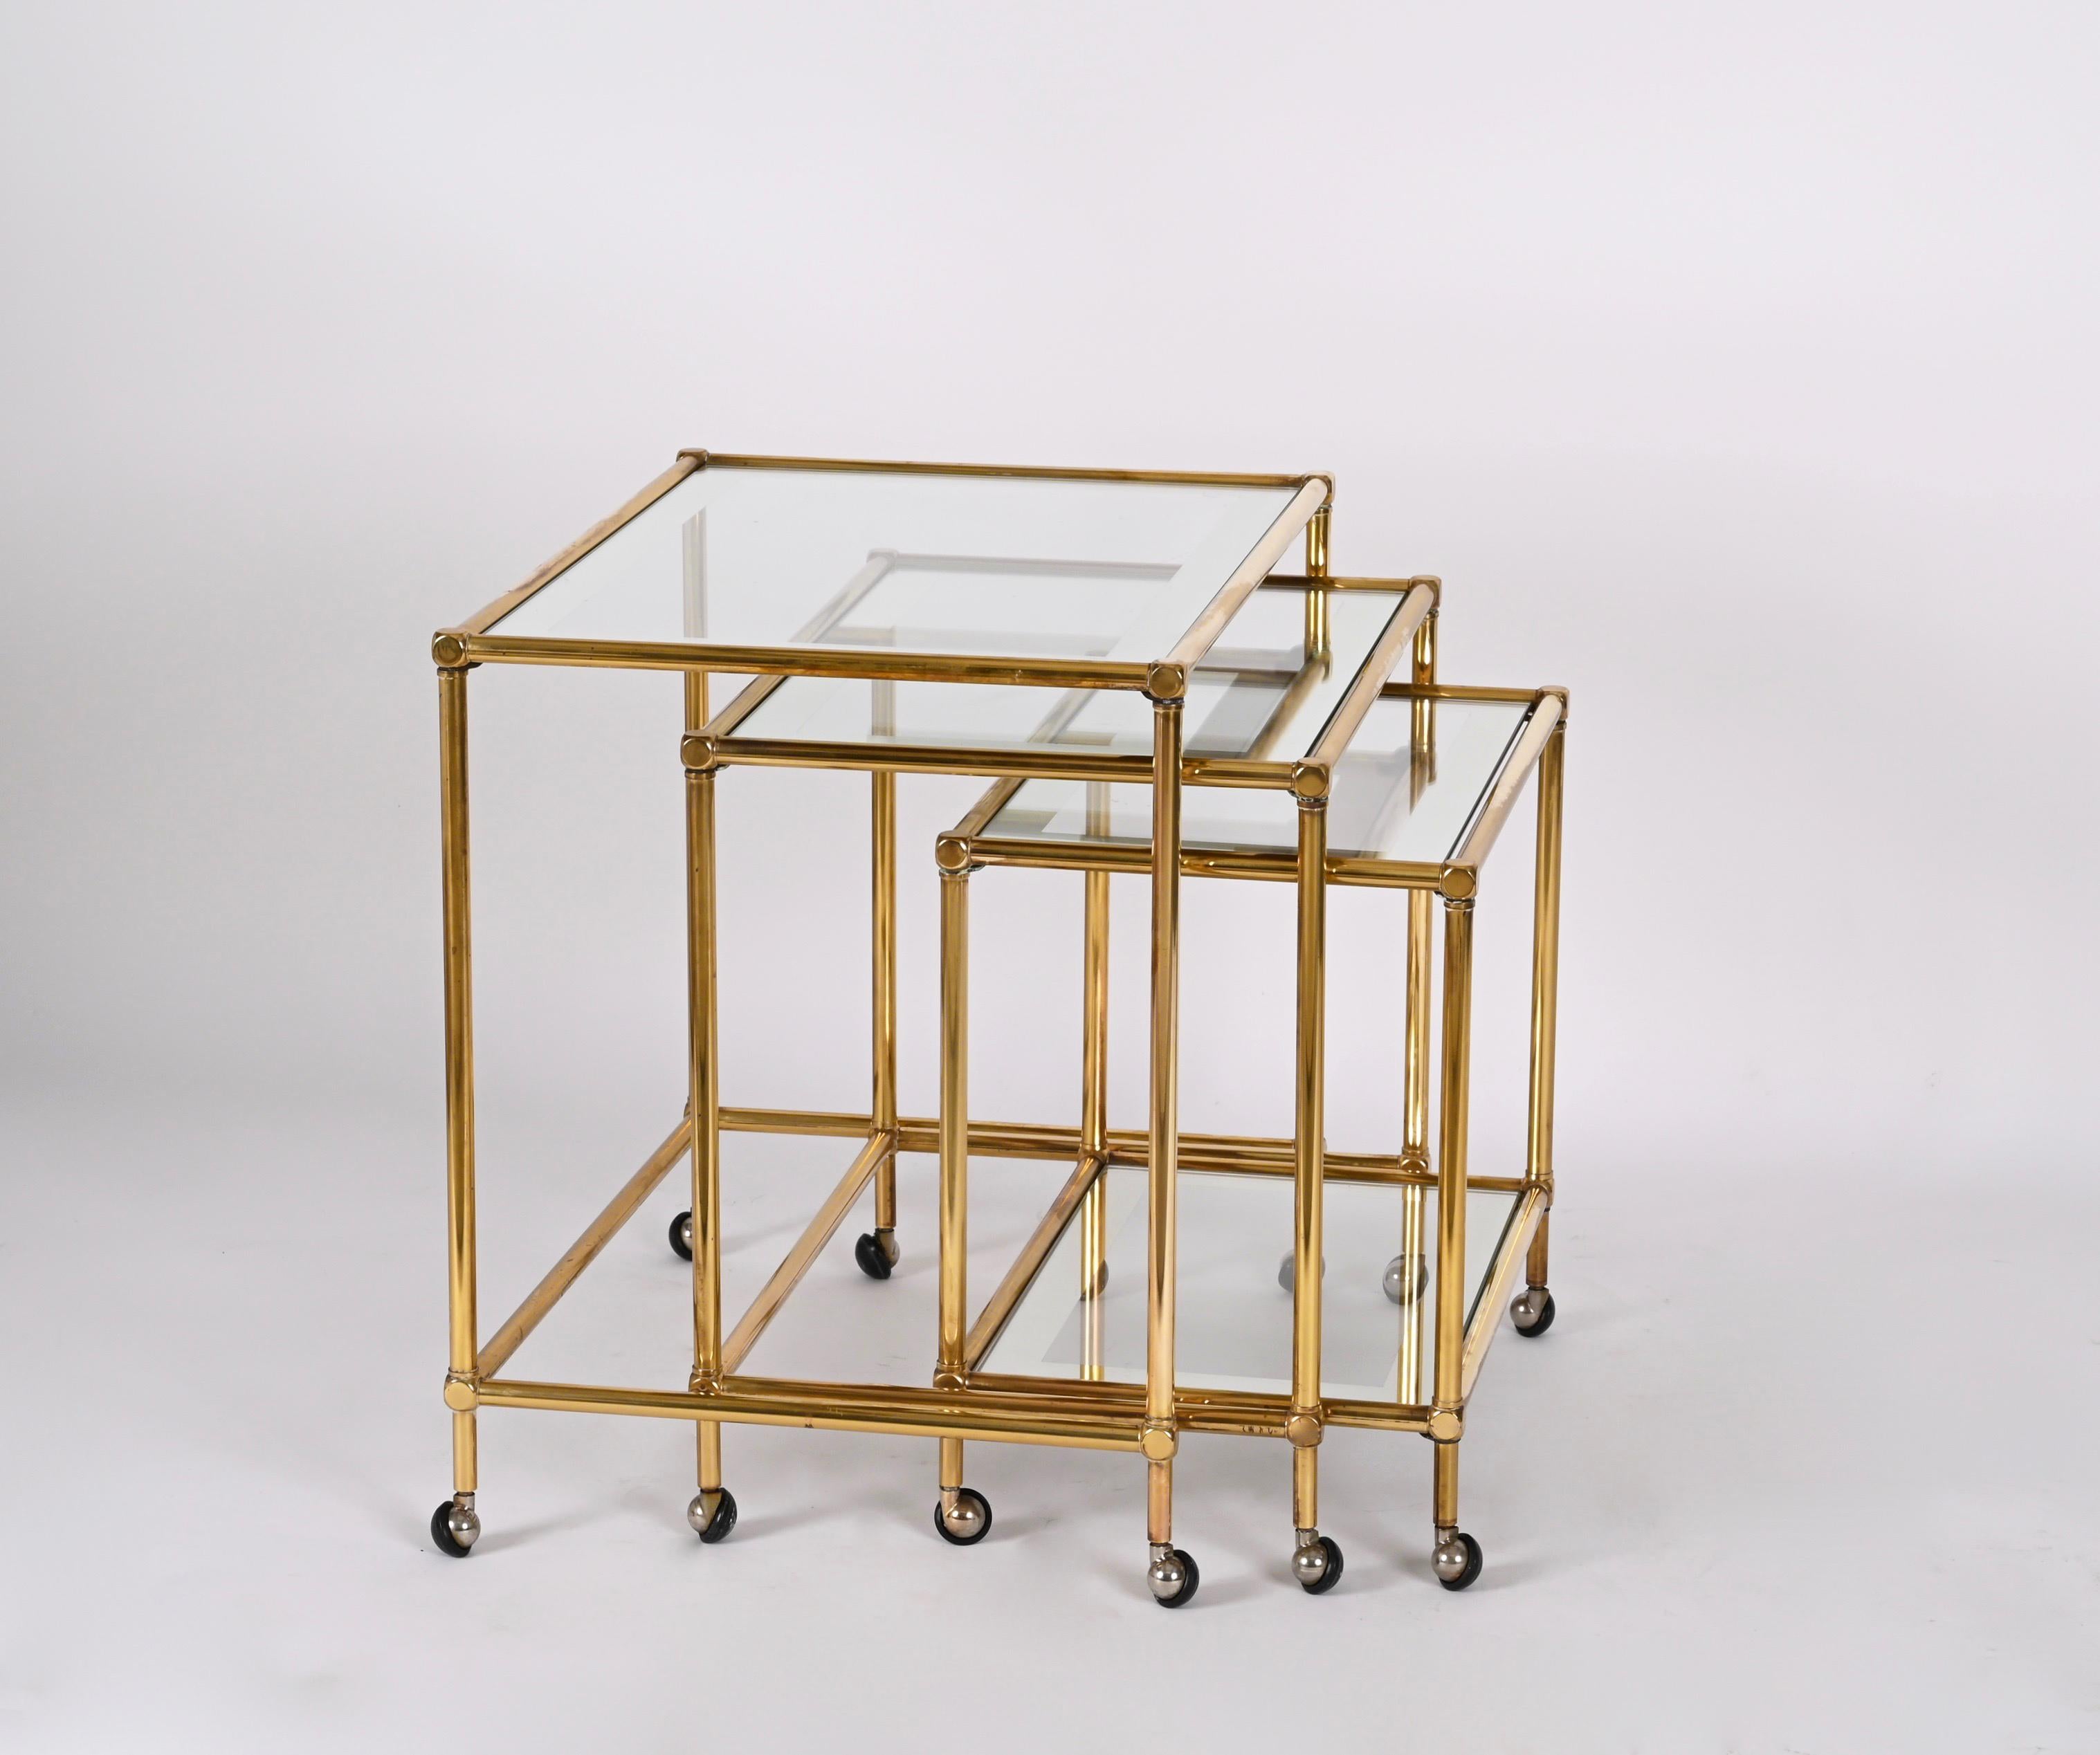 Set of Brass Mirrored Border with Glass Top Nesting Tables, Maison Jansen, 1970s For Sale 7